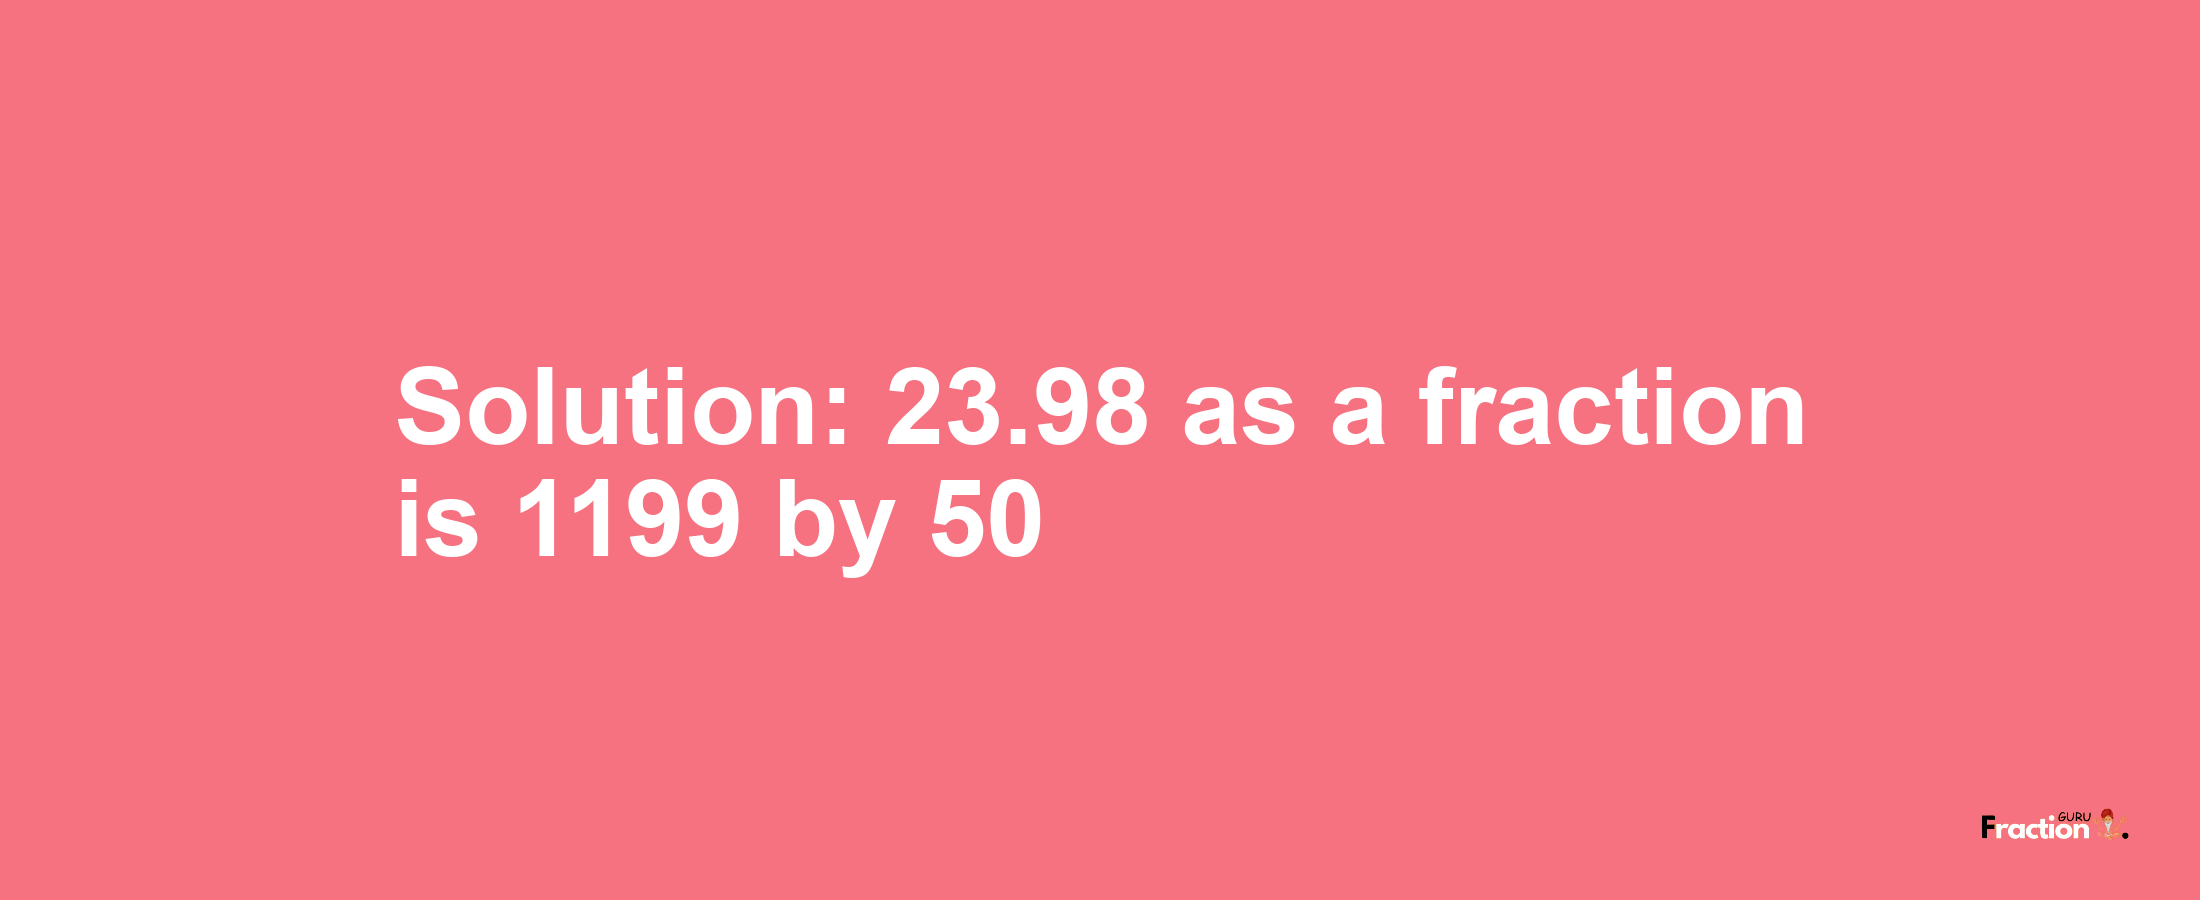 Solution:23.98 as a fraction is 1199/50